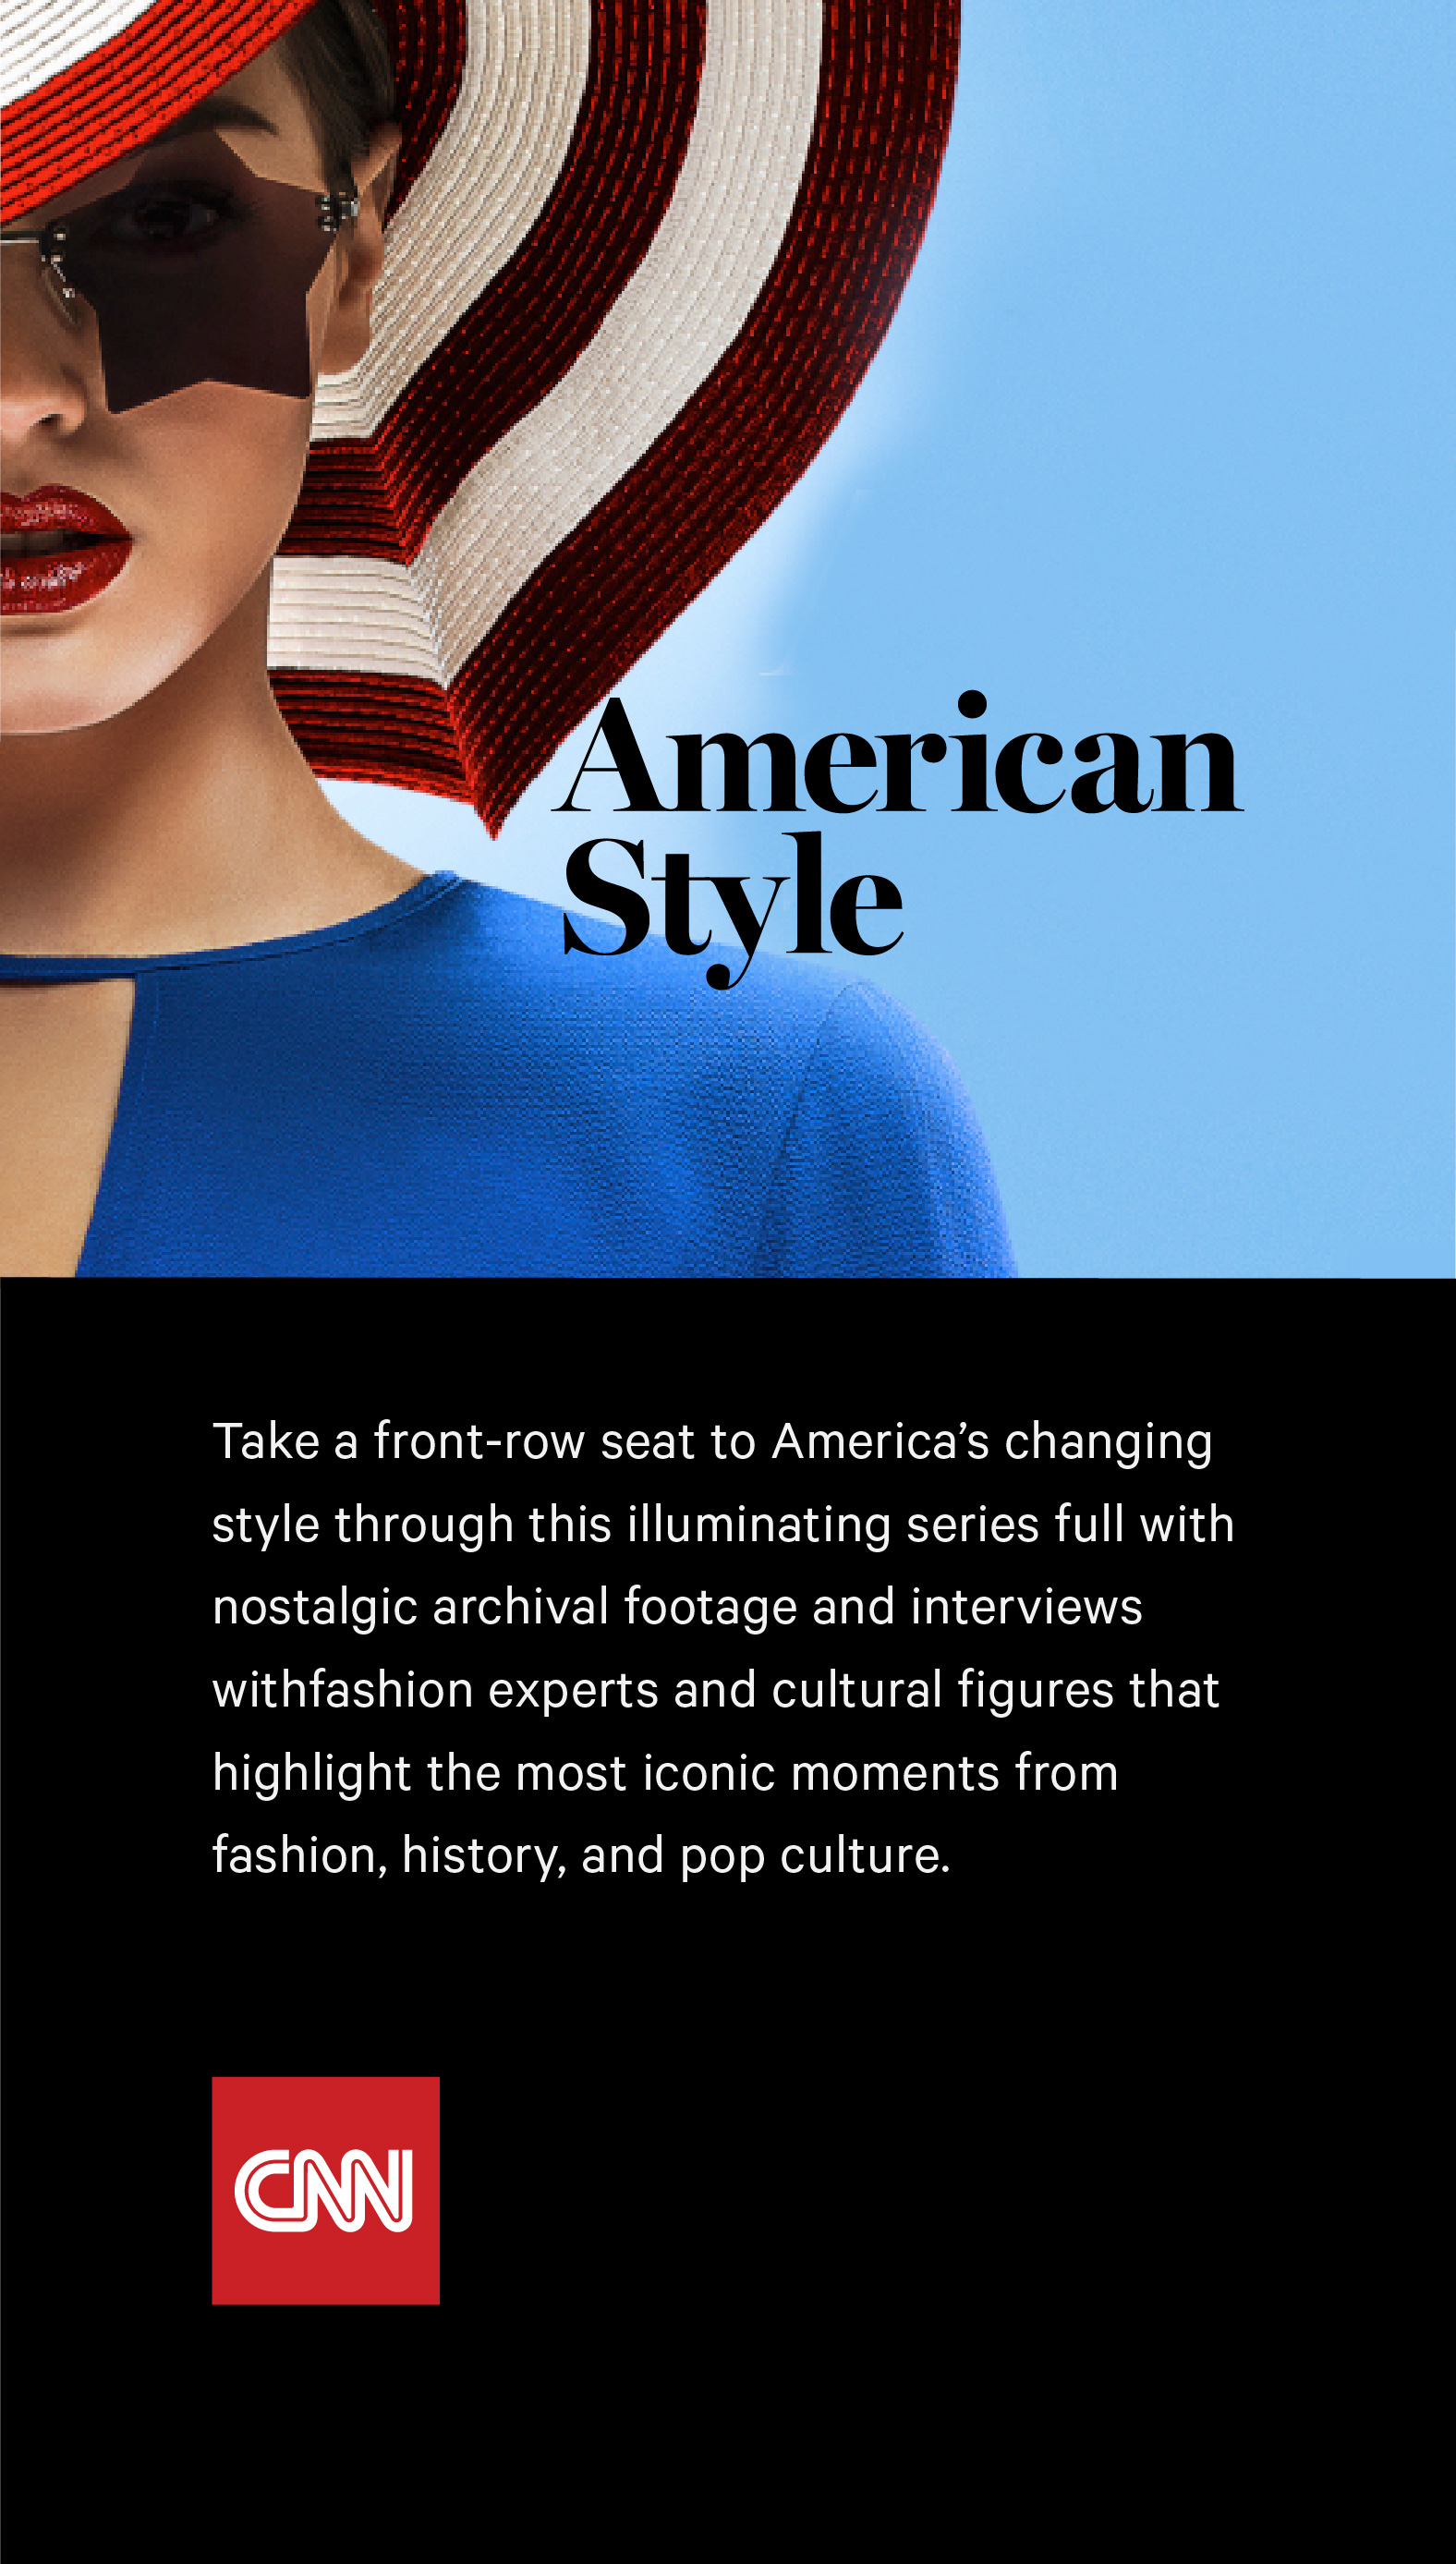 woman-wearing-and-holding-rim-of-red-and-white-striped-hat-and-star-sunglasses-red-lipstick-blue-top-american-style-logo-cnn-logo